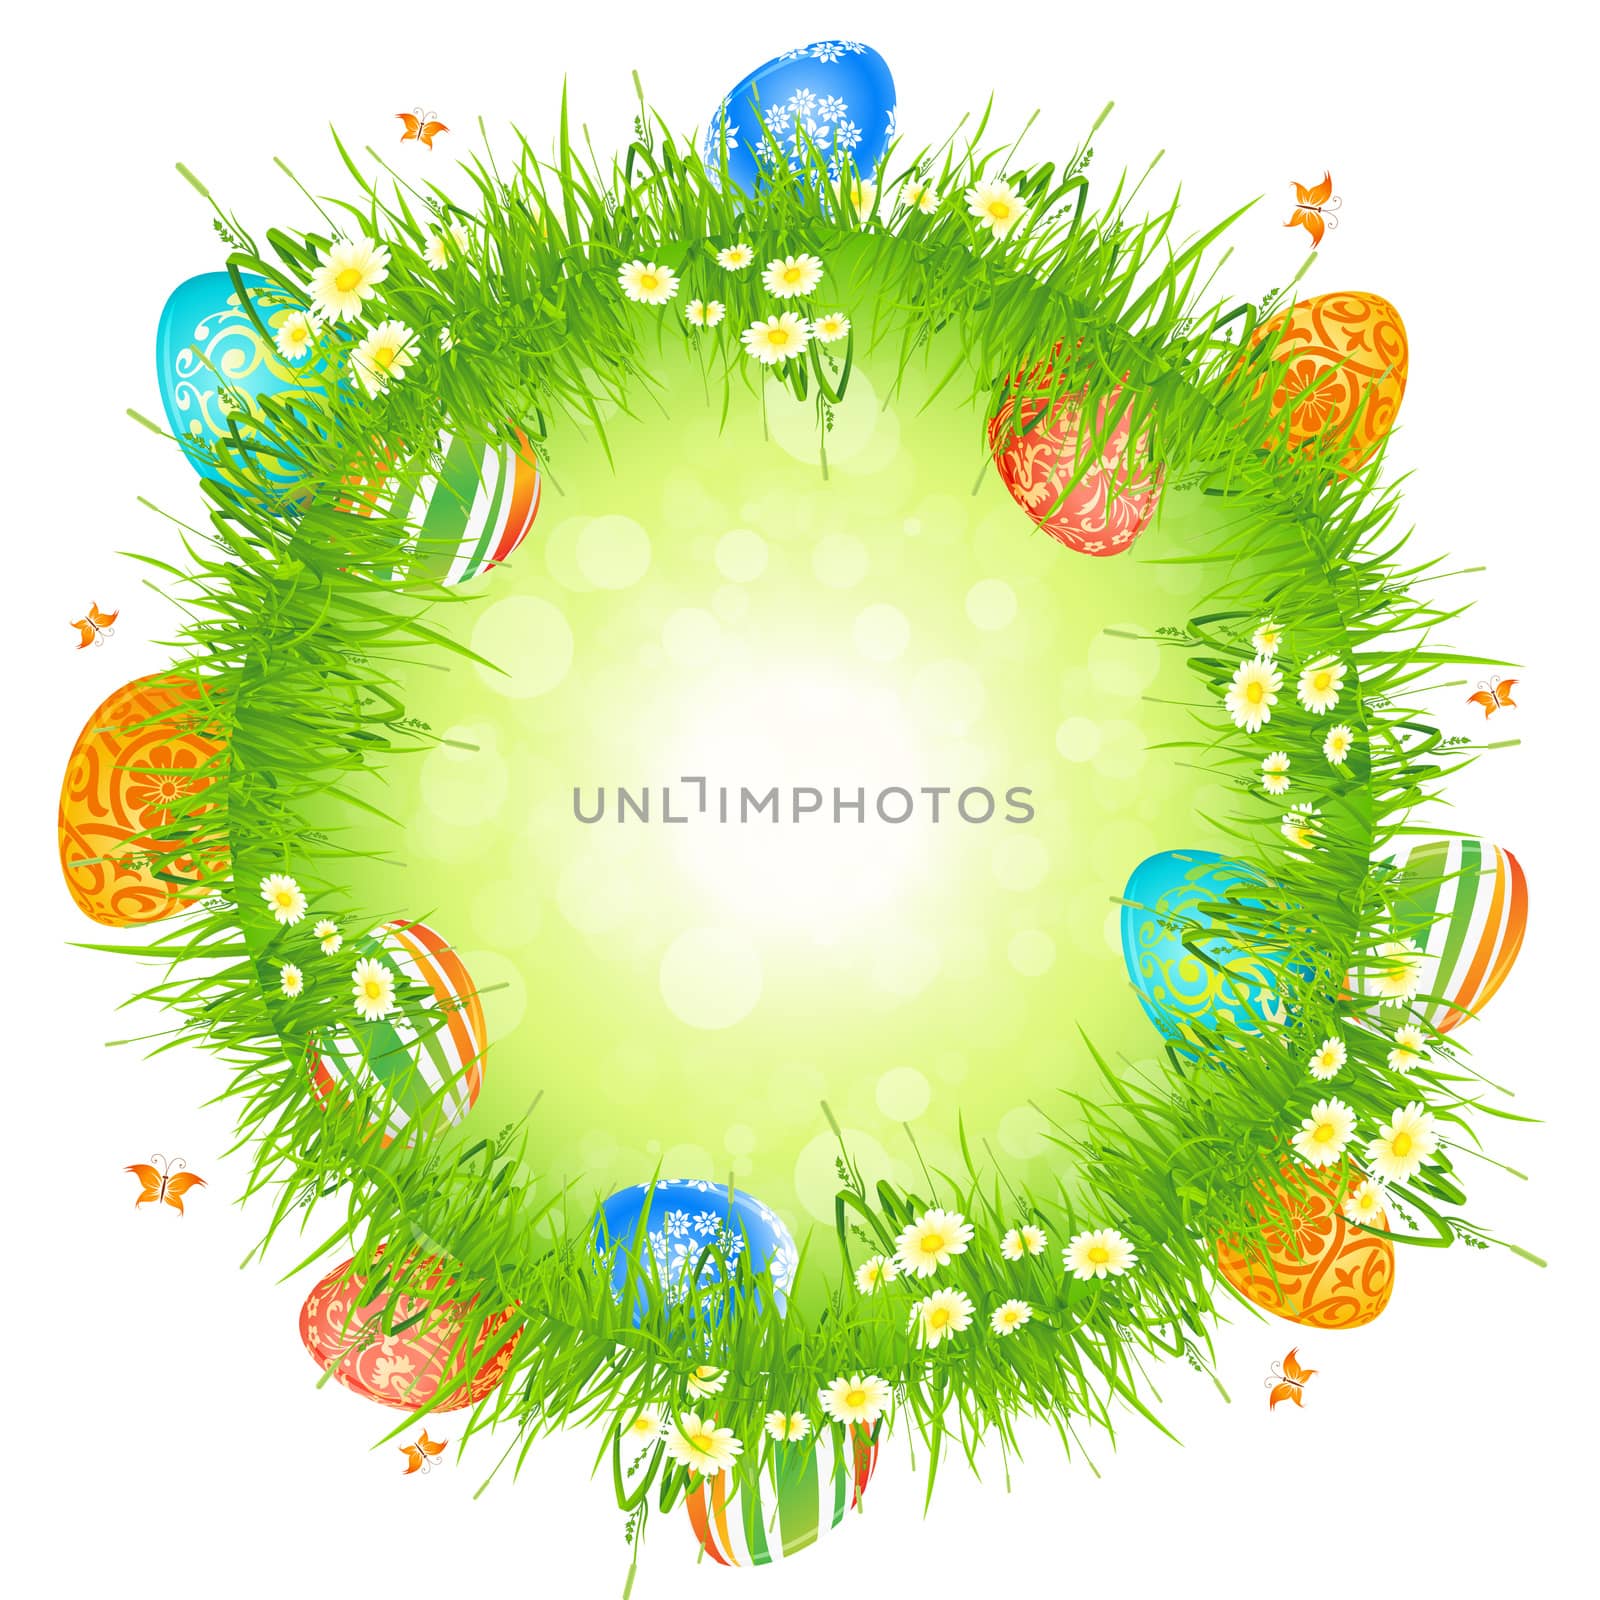 Easter Eggs in the Grass with Flowers and Butterflies